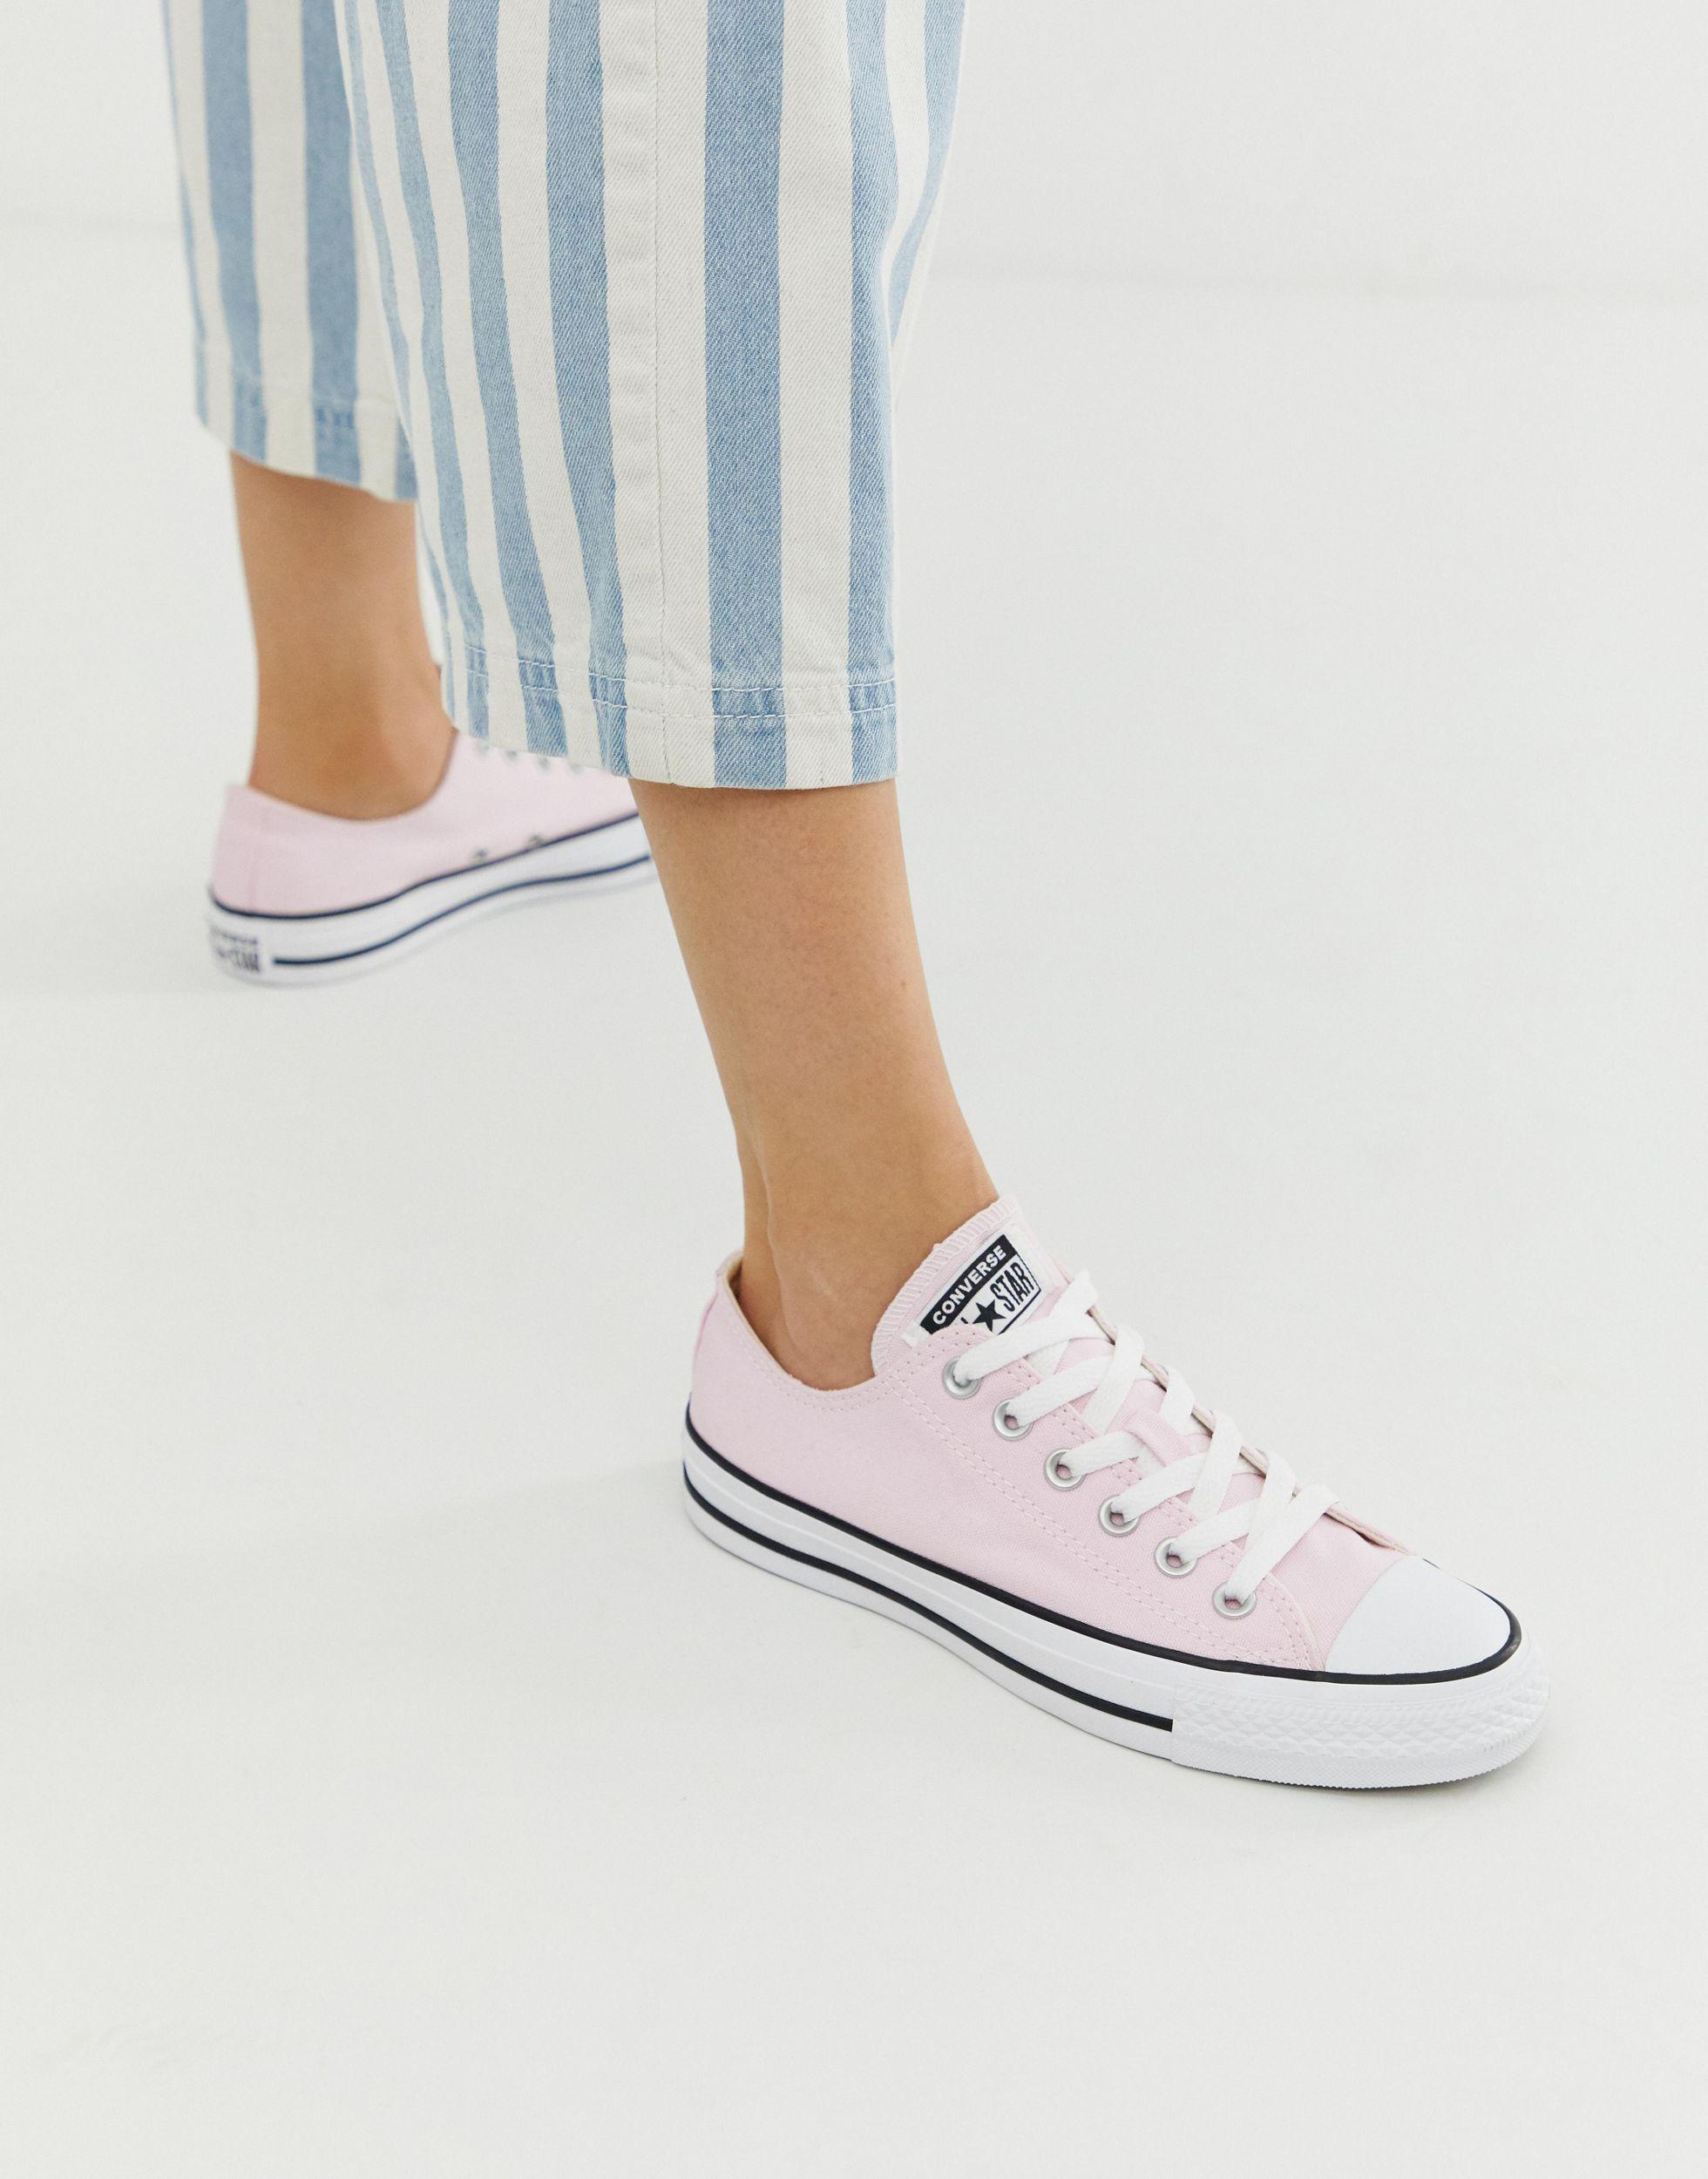 Converse Canvas Chuck Taylor All Star Lift Ox Trainers in Pink | Lyst